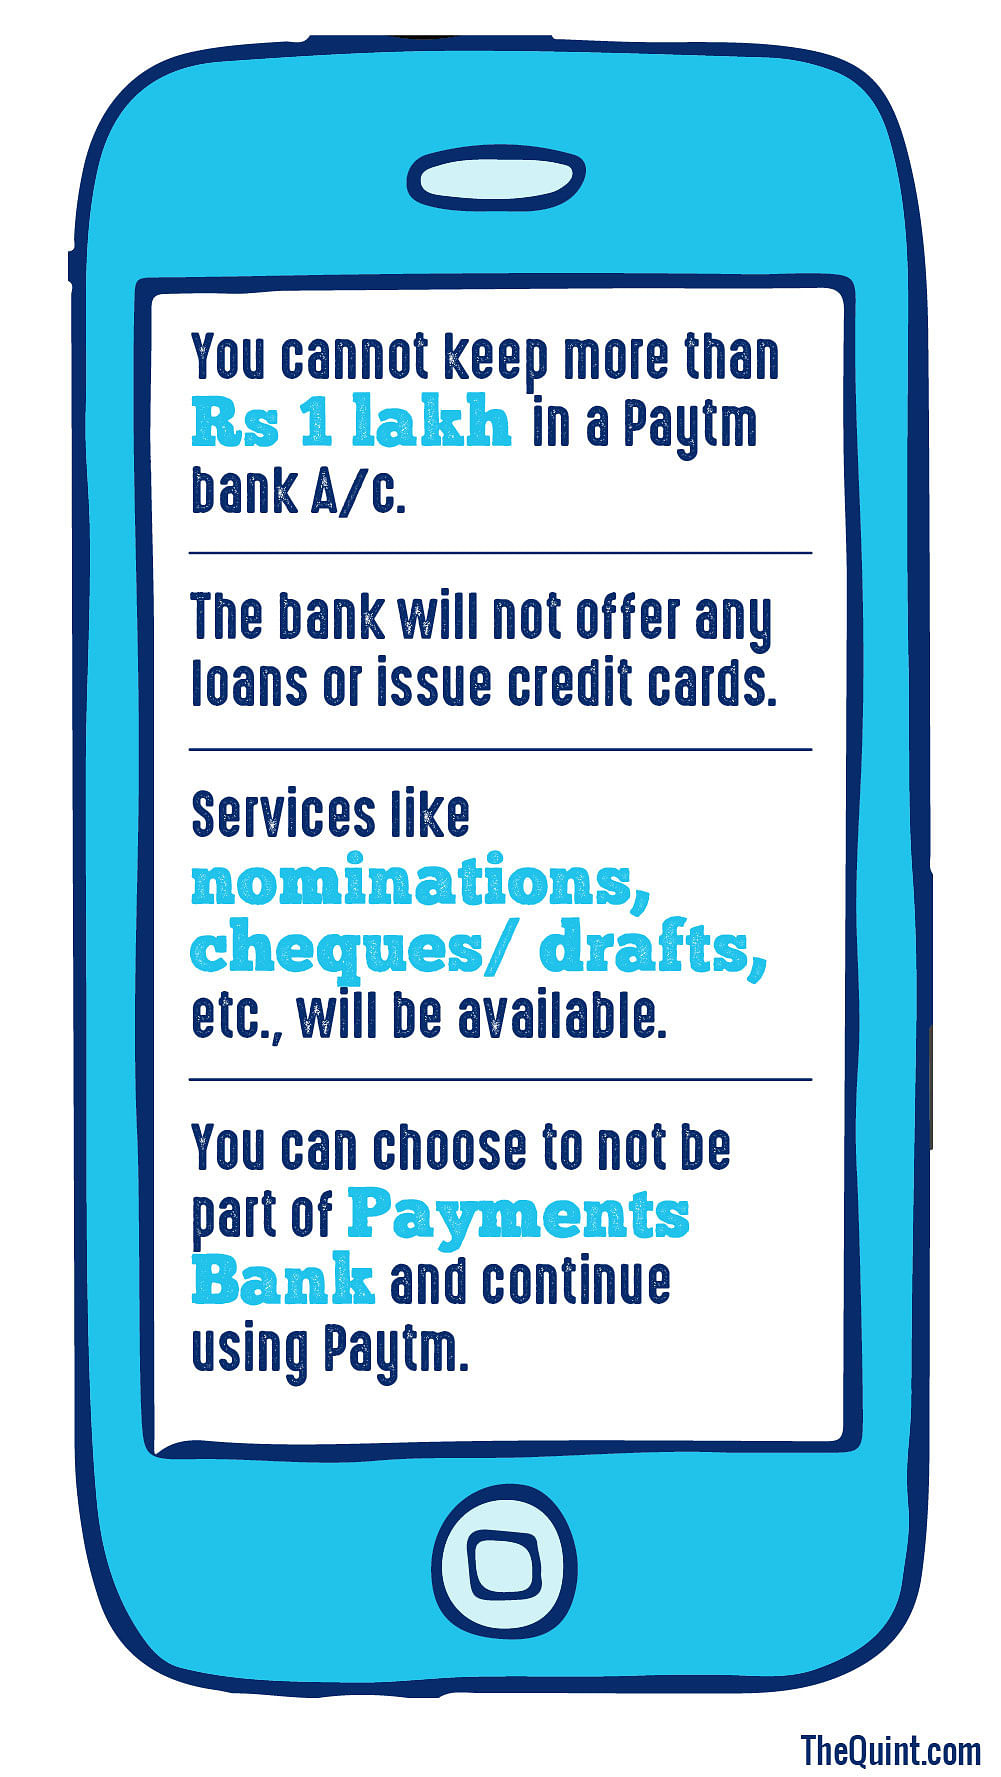 Paytm Payments Bank is now live in India. Here’s everything you need to know about the bank and how it works.